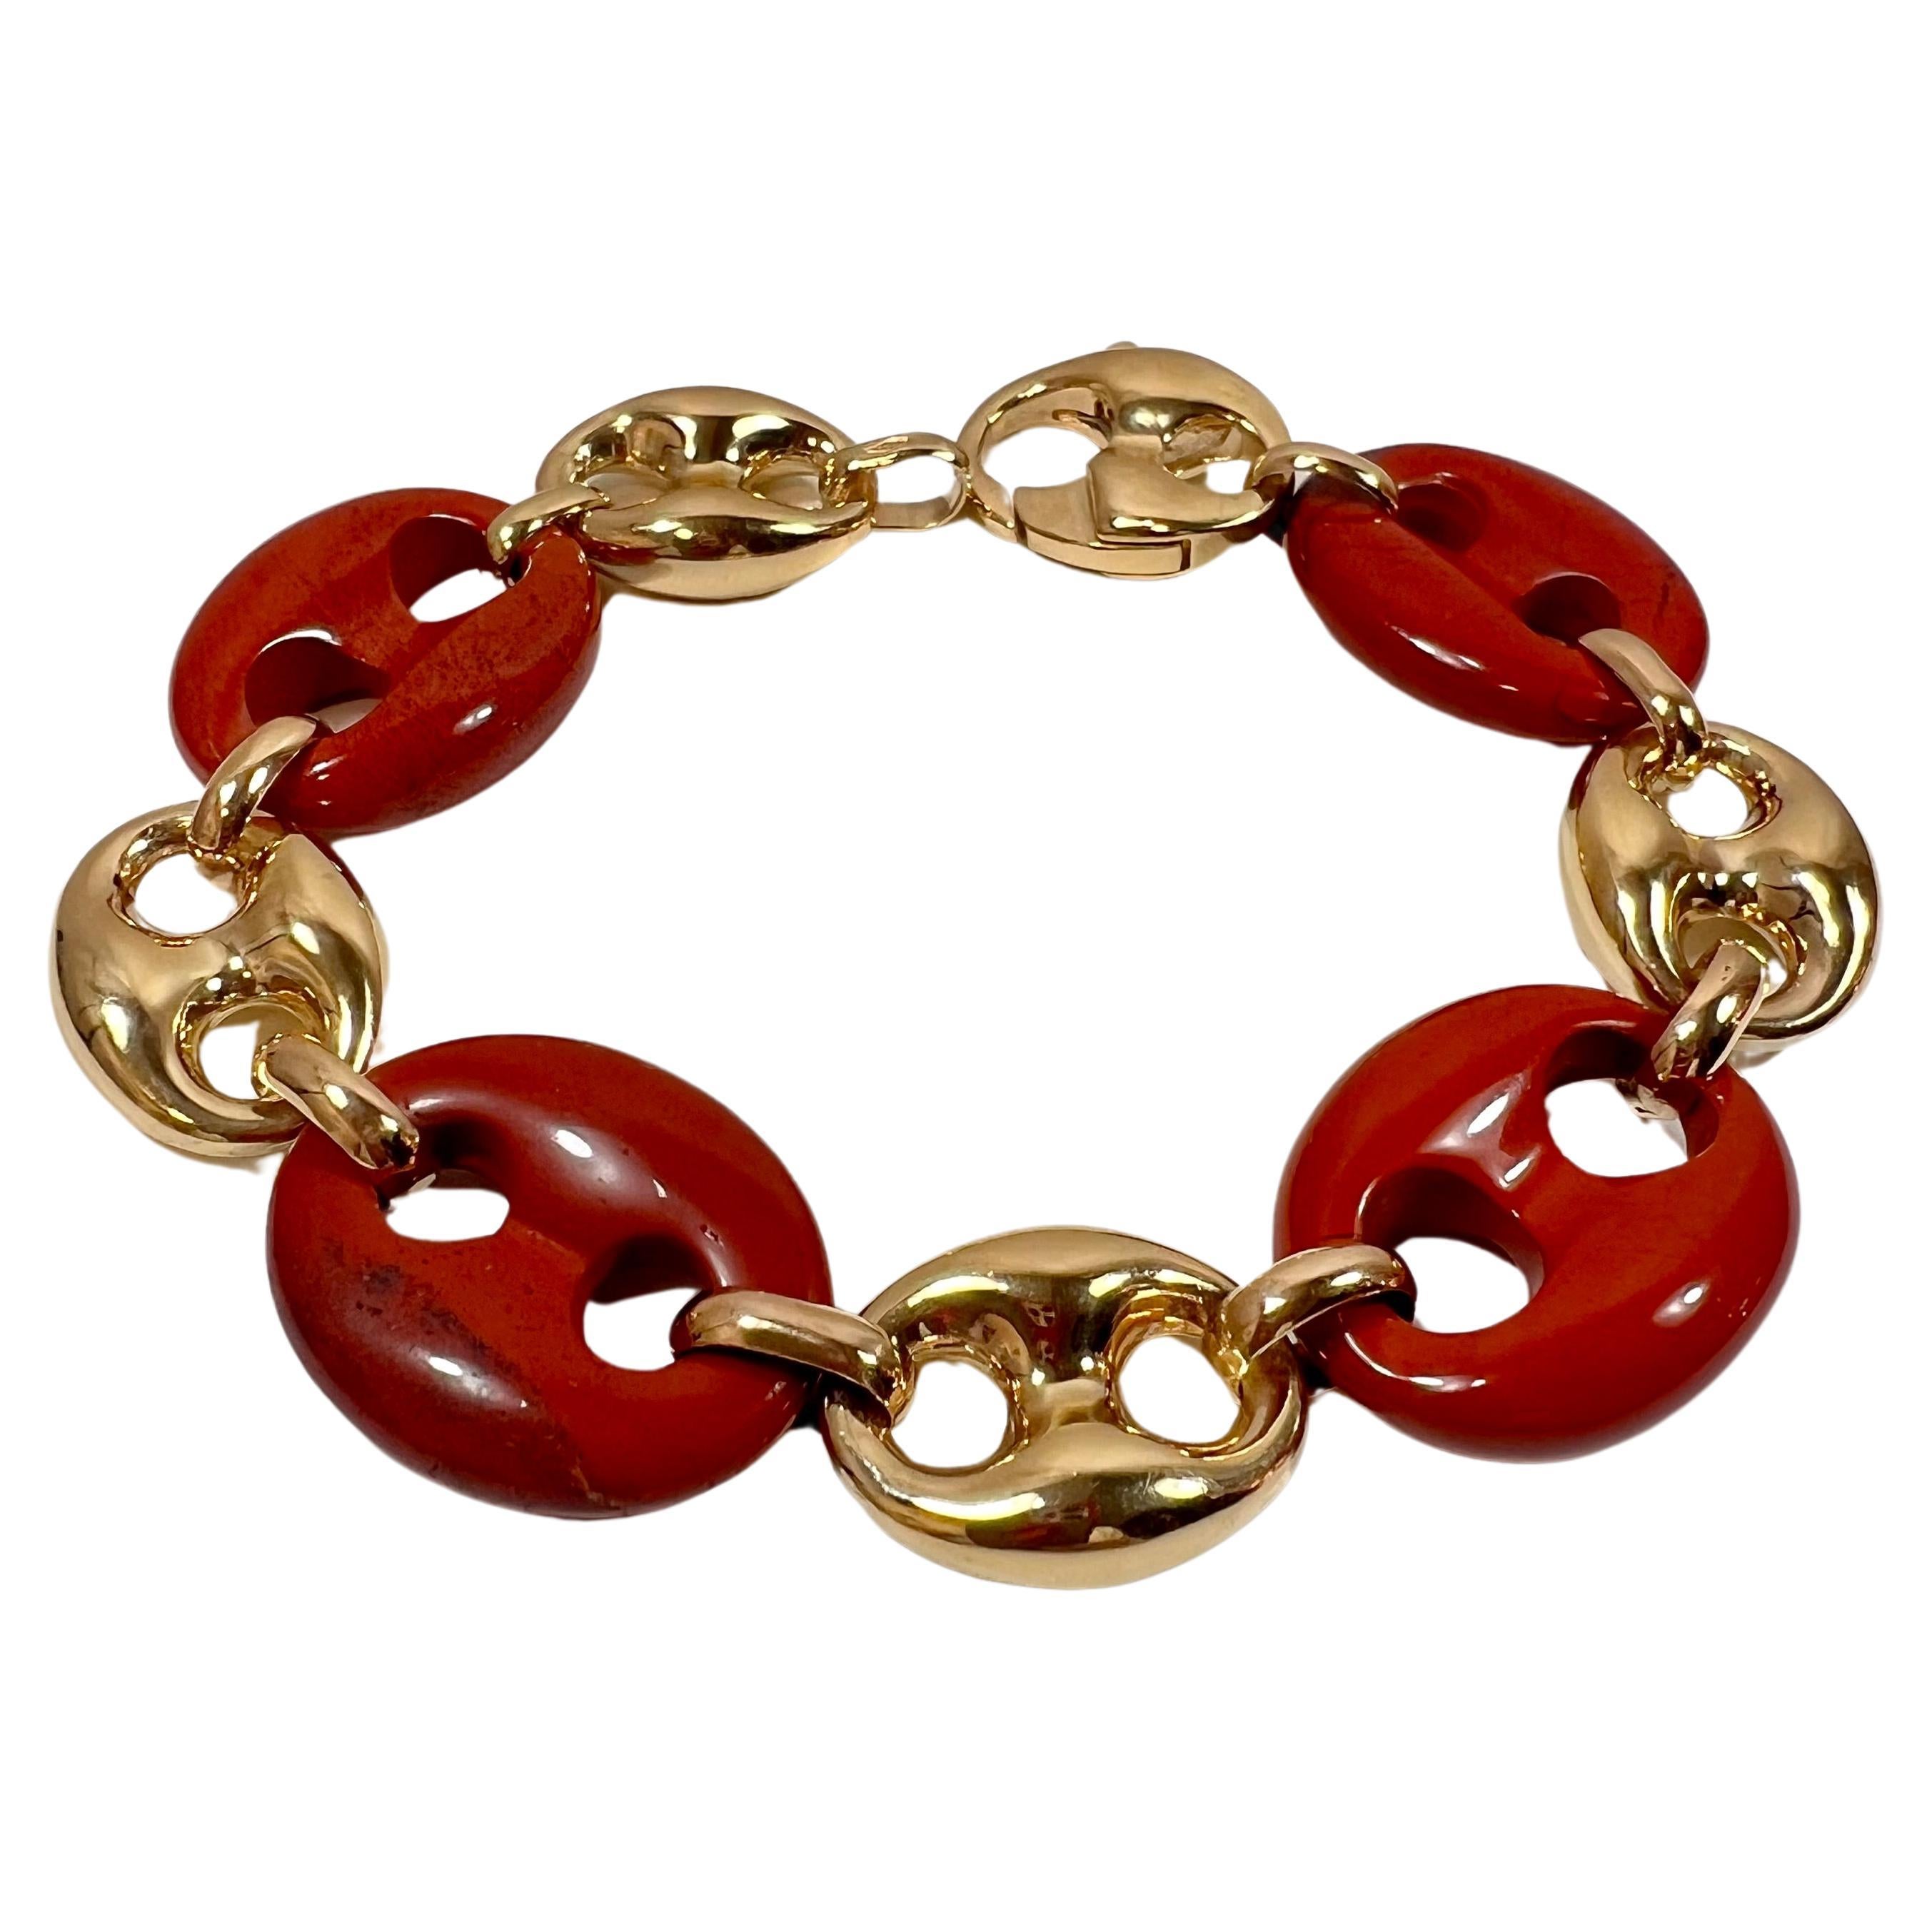 Nautical Anchor Link Bracelet 18K Solid Yellow Gold and Intense Red Jasper